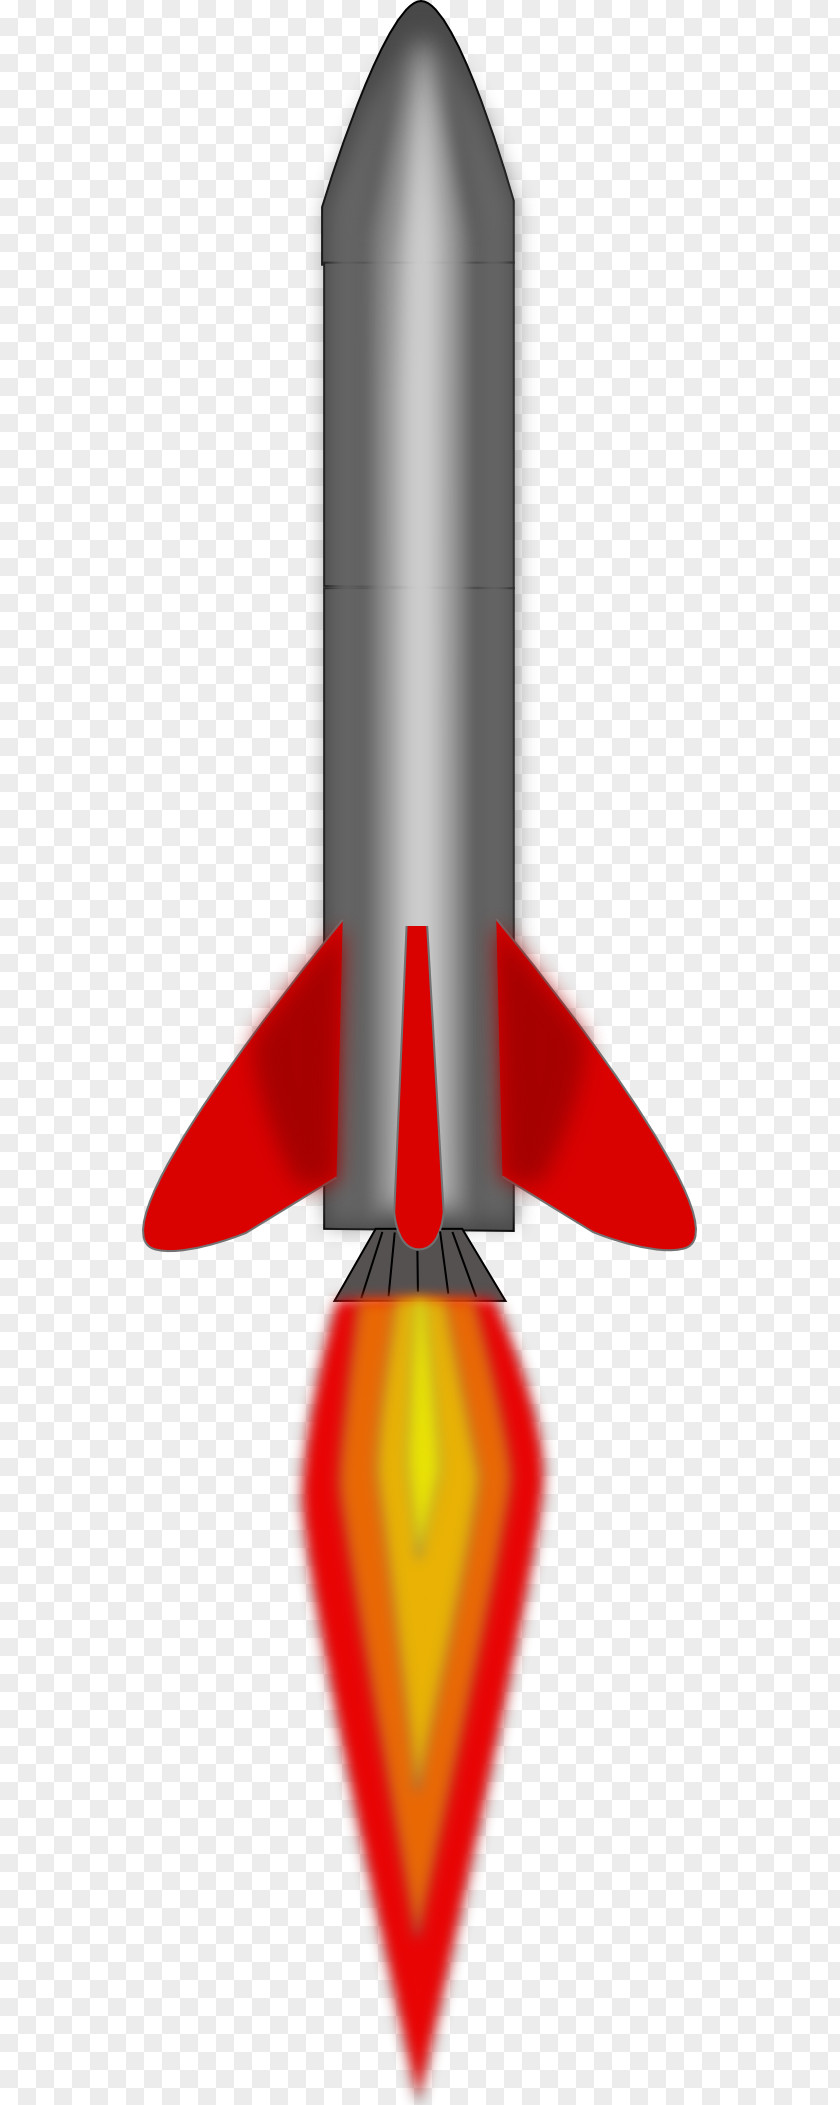 Nuclear Missile Cliparts Rocket Launcher Spacecraft Clip Art PNG